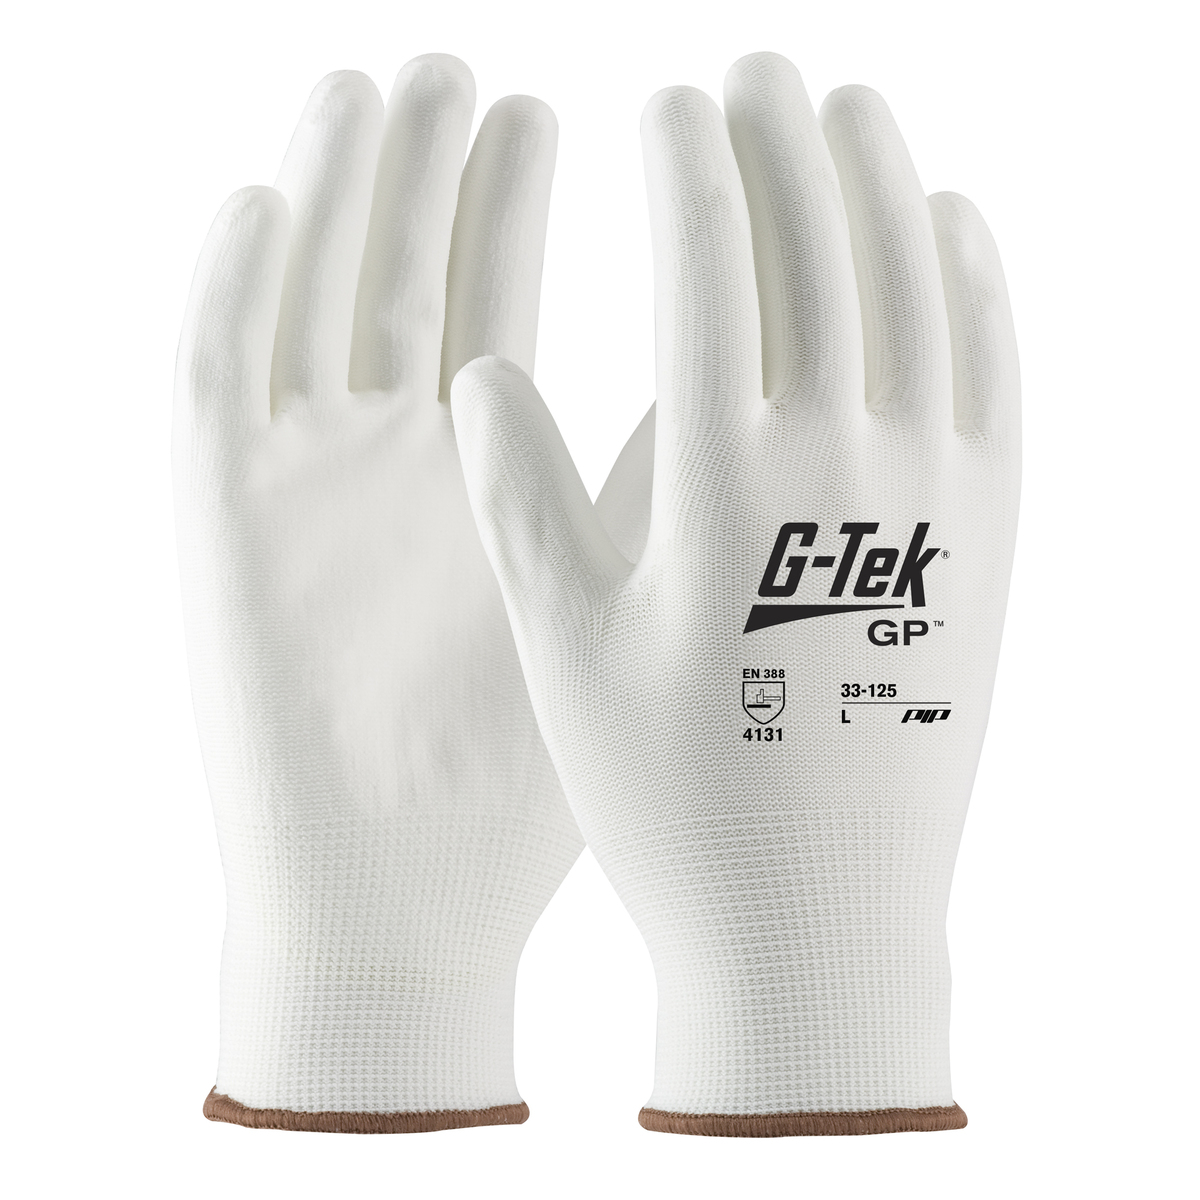 PIP® X-Large G-Tek® GP™ 13 Gauge White Polyurethane Palm And Finger Coated Work Gloves With Nylon Liner And Continuous Knit Wris